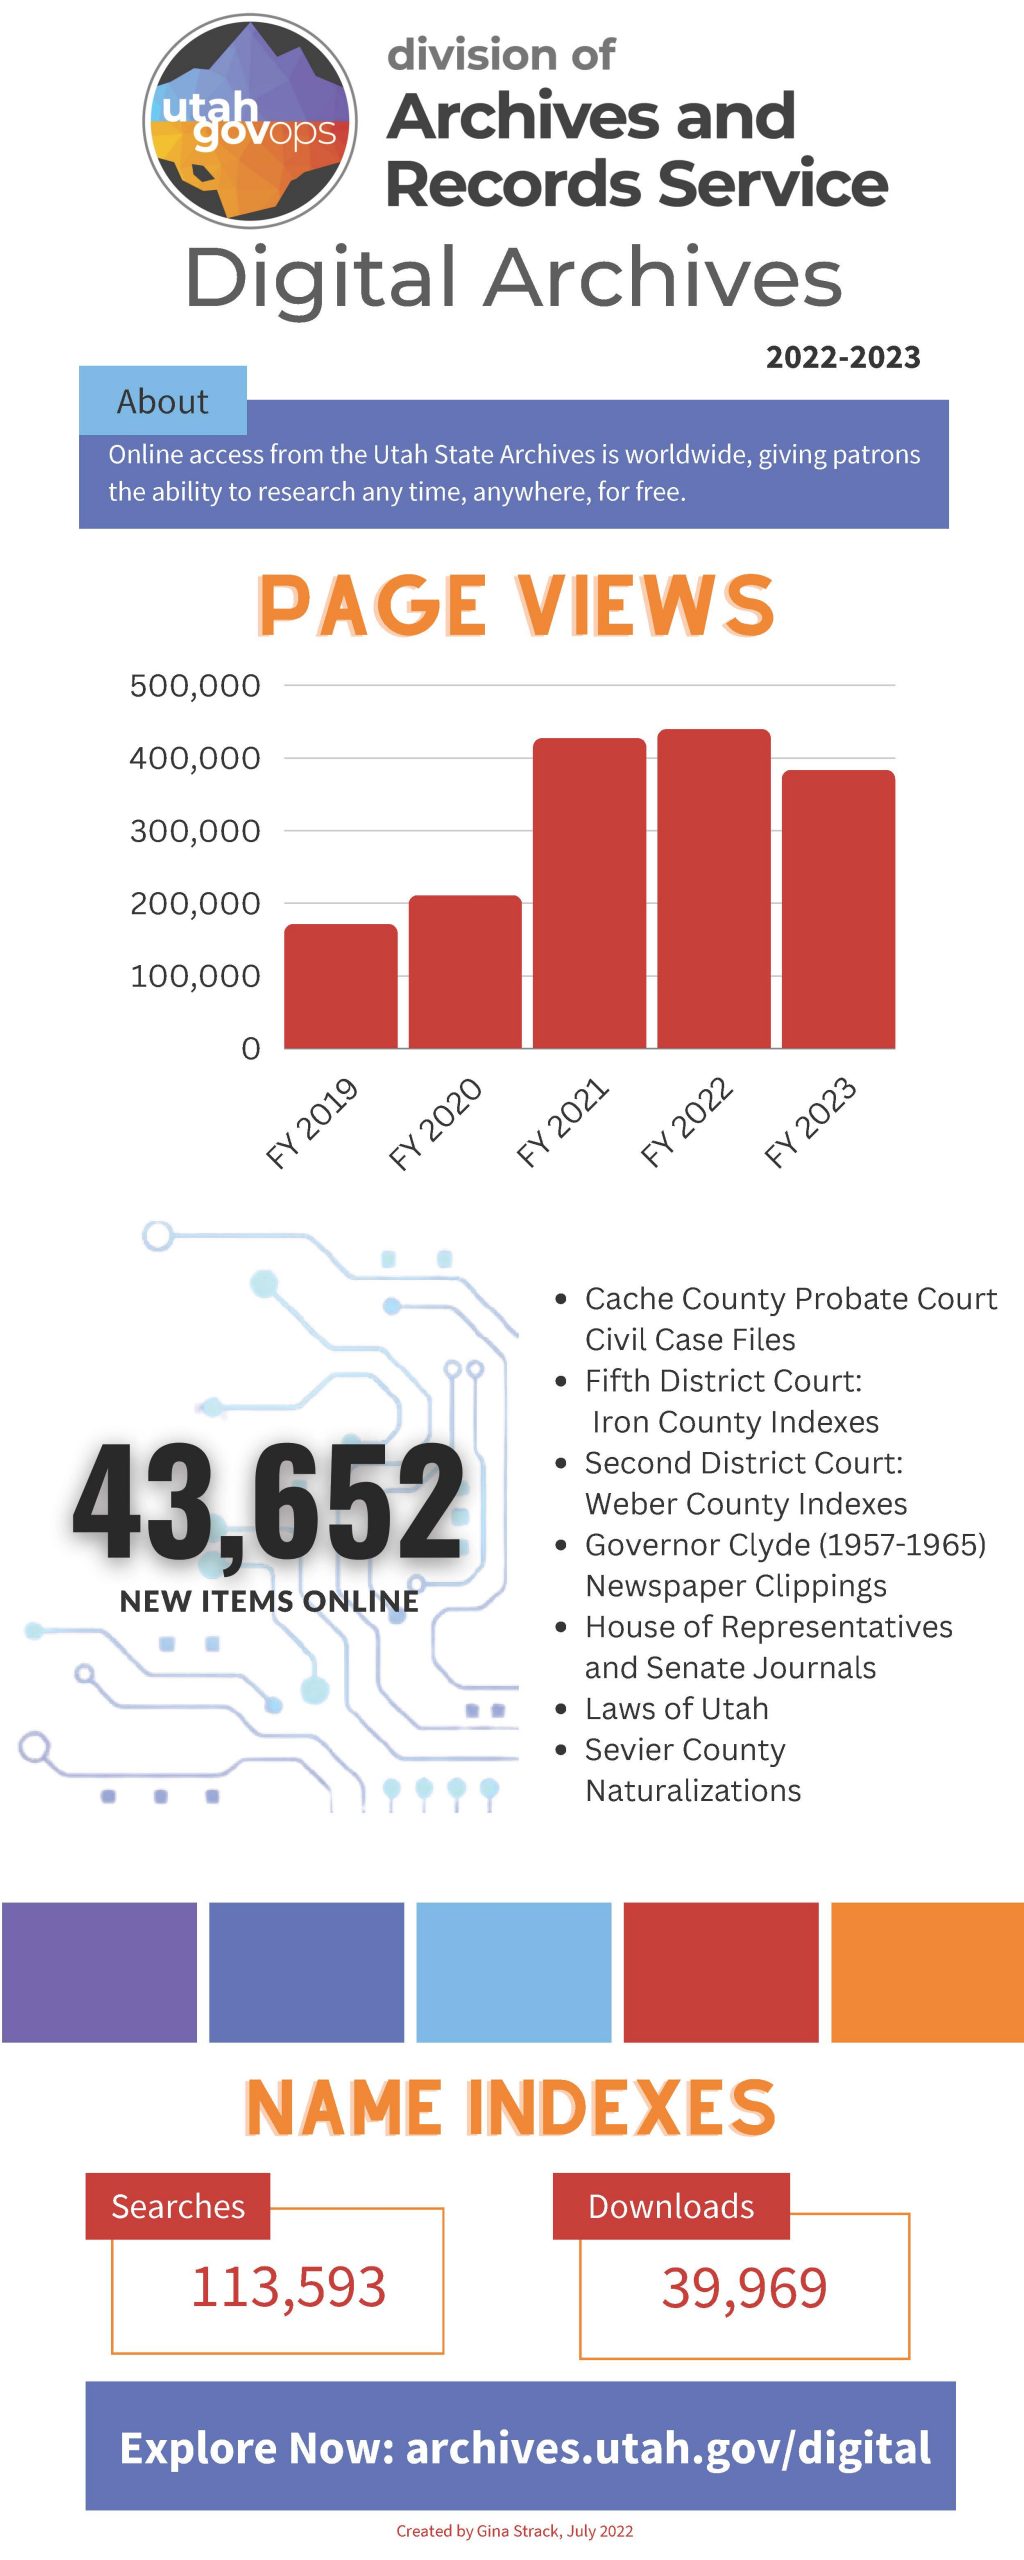 Infographic showing results of the 2022-2023 fiscal year in the Digital Archives program.